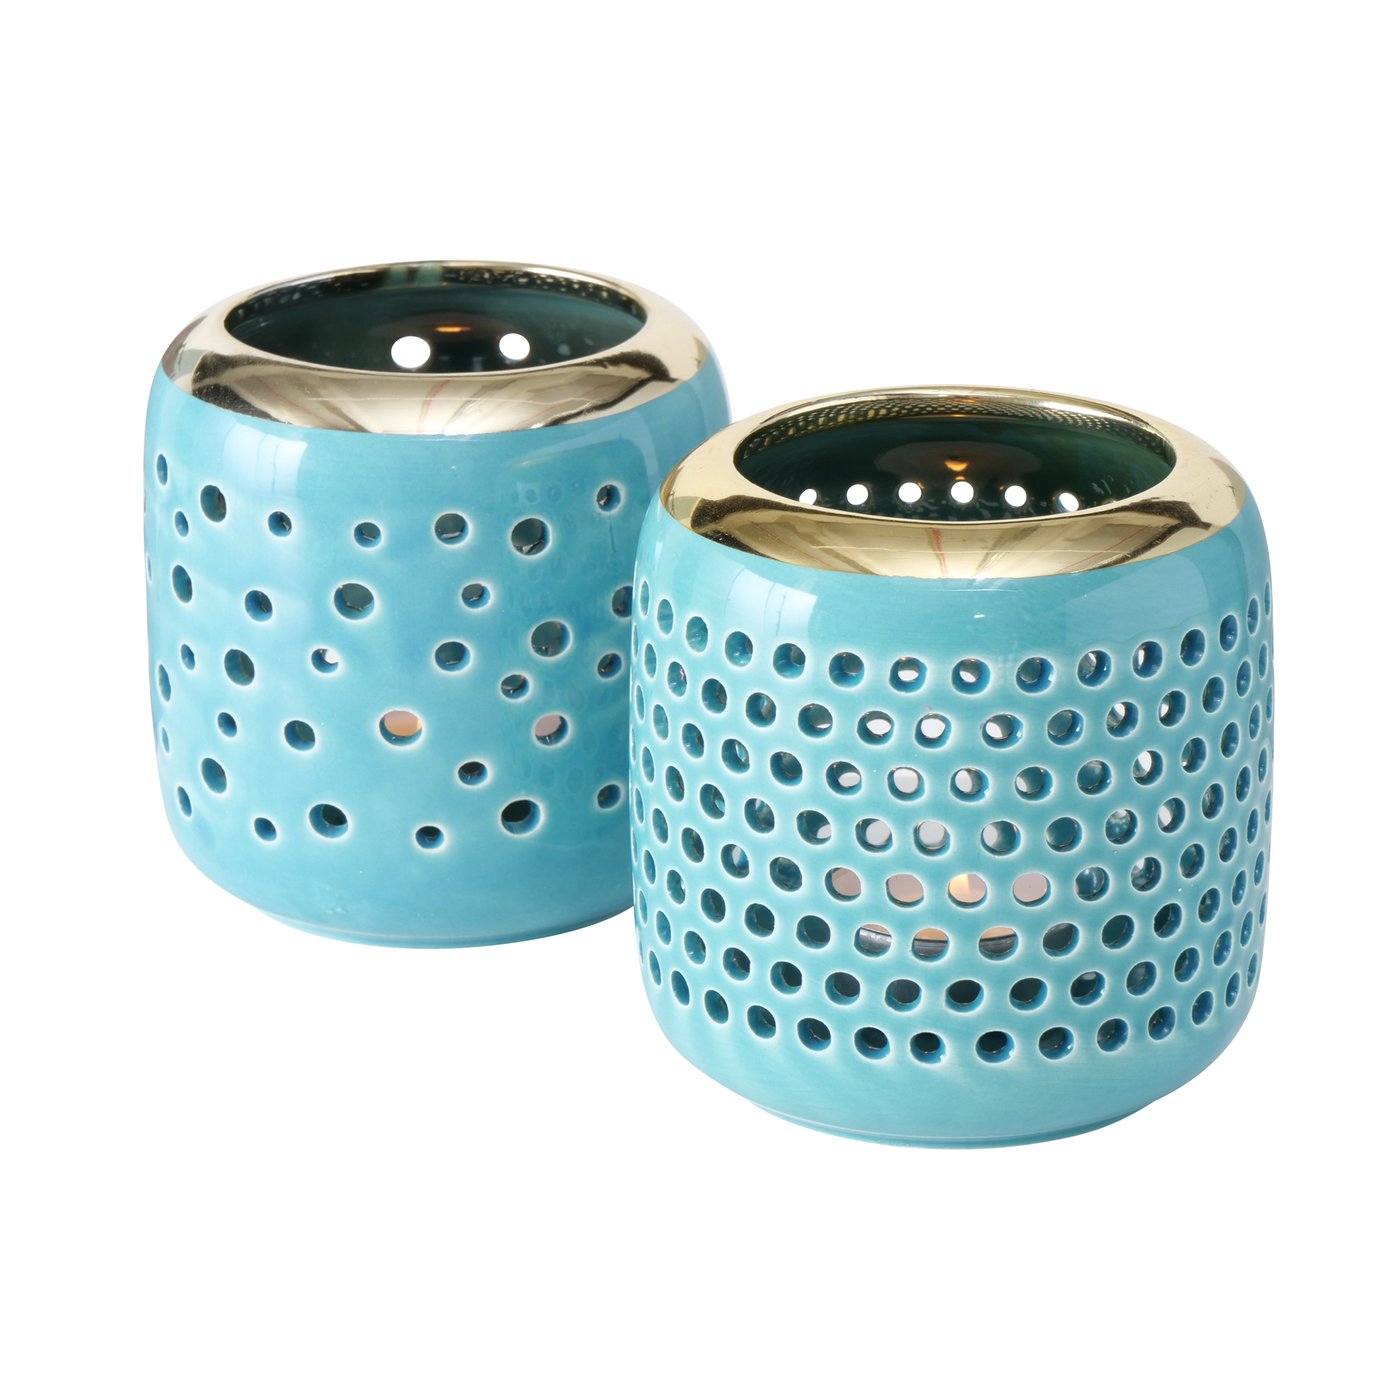 &Quirky Turquoise Ceramic Tealight Holder Small : Big Holes or Small Holes